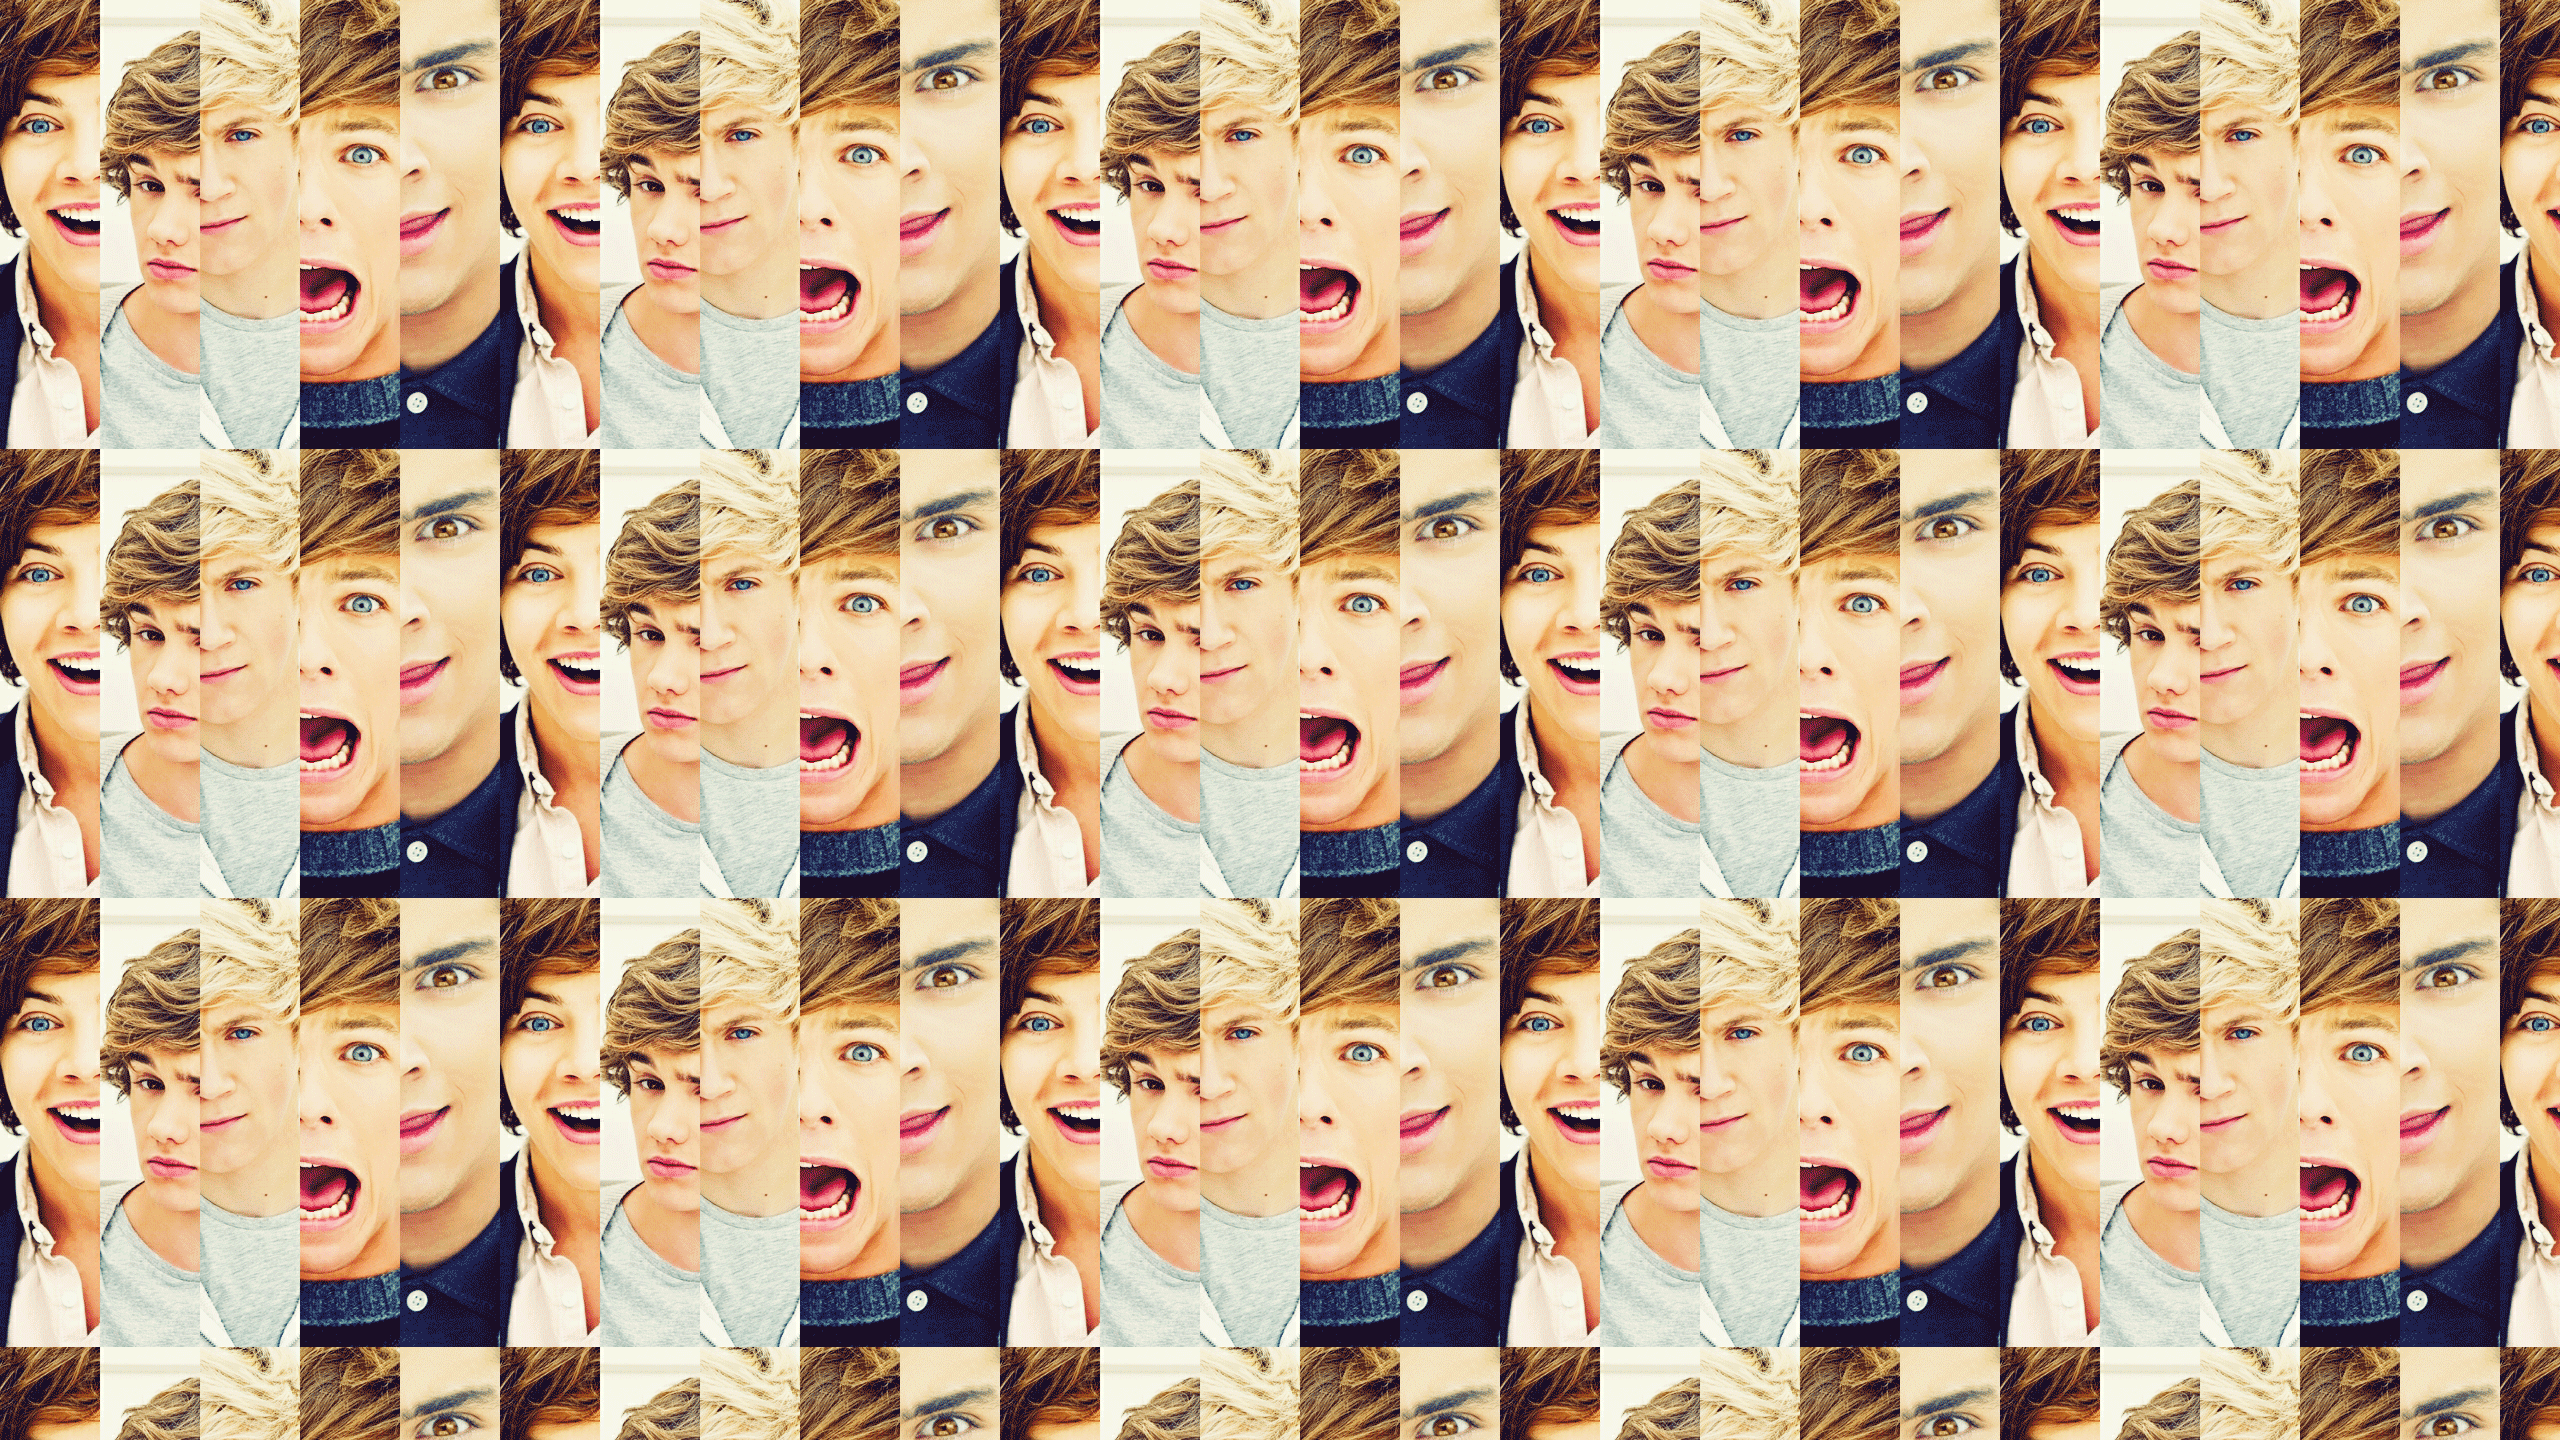 Free download this One Direction Desktop Wallpaper is easy Just save the wallpaper [2560x1440] for your Desktop, Mobile & Tablet. Explore 5SOS and One Direction WallpaperSOS